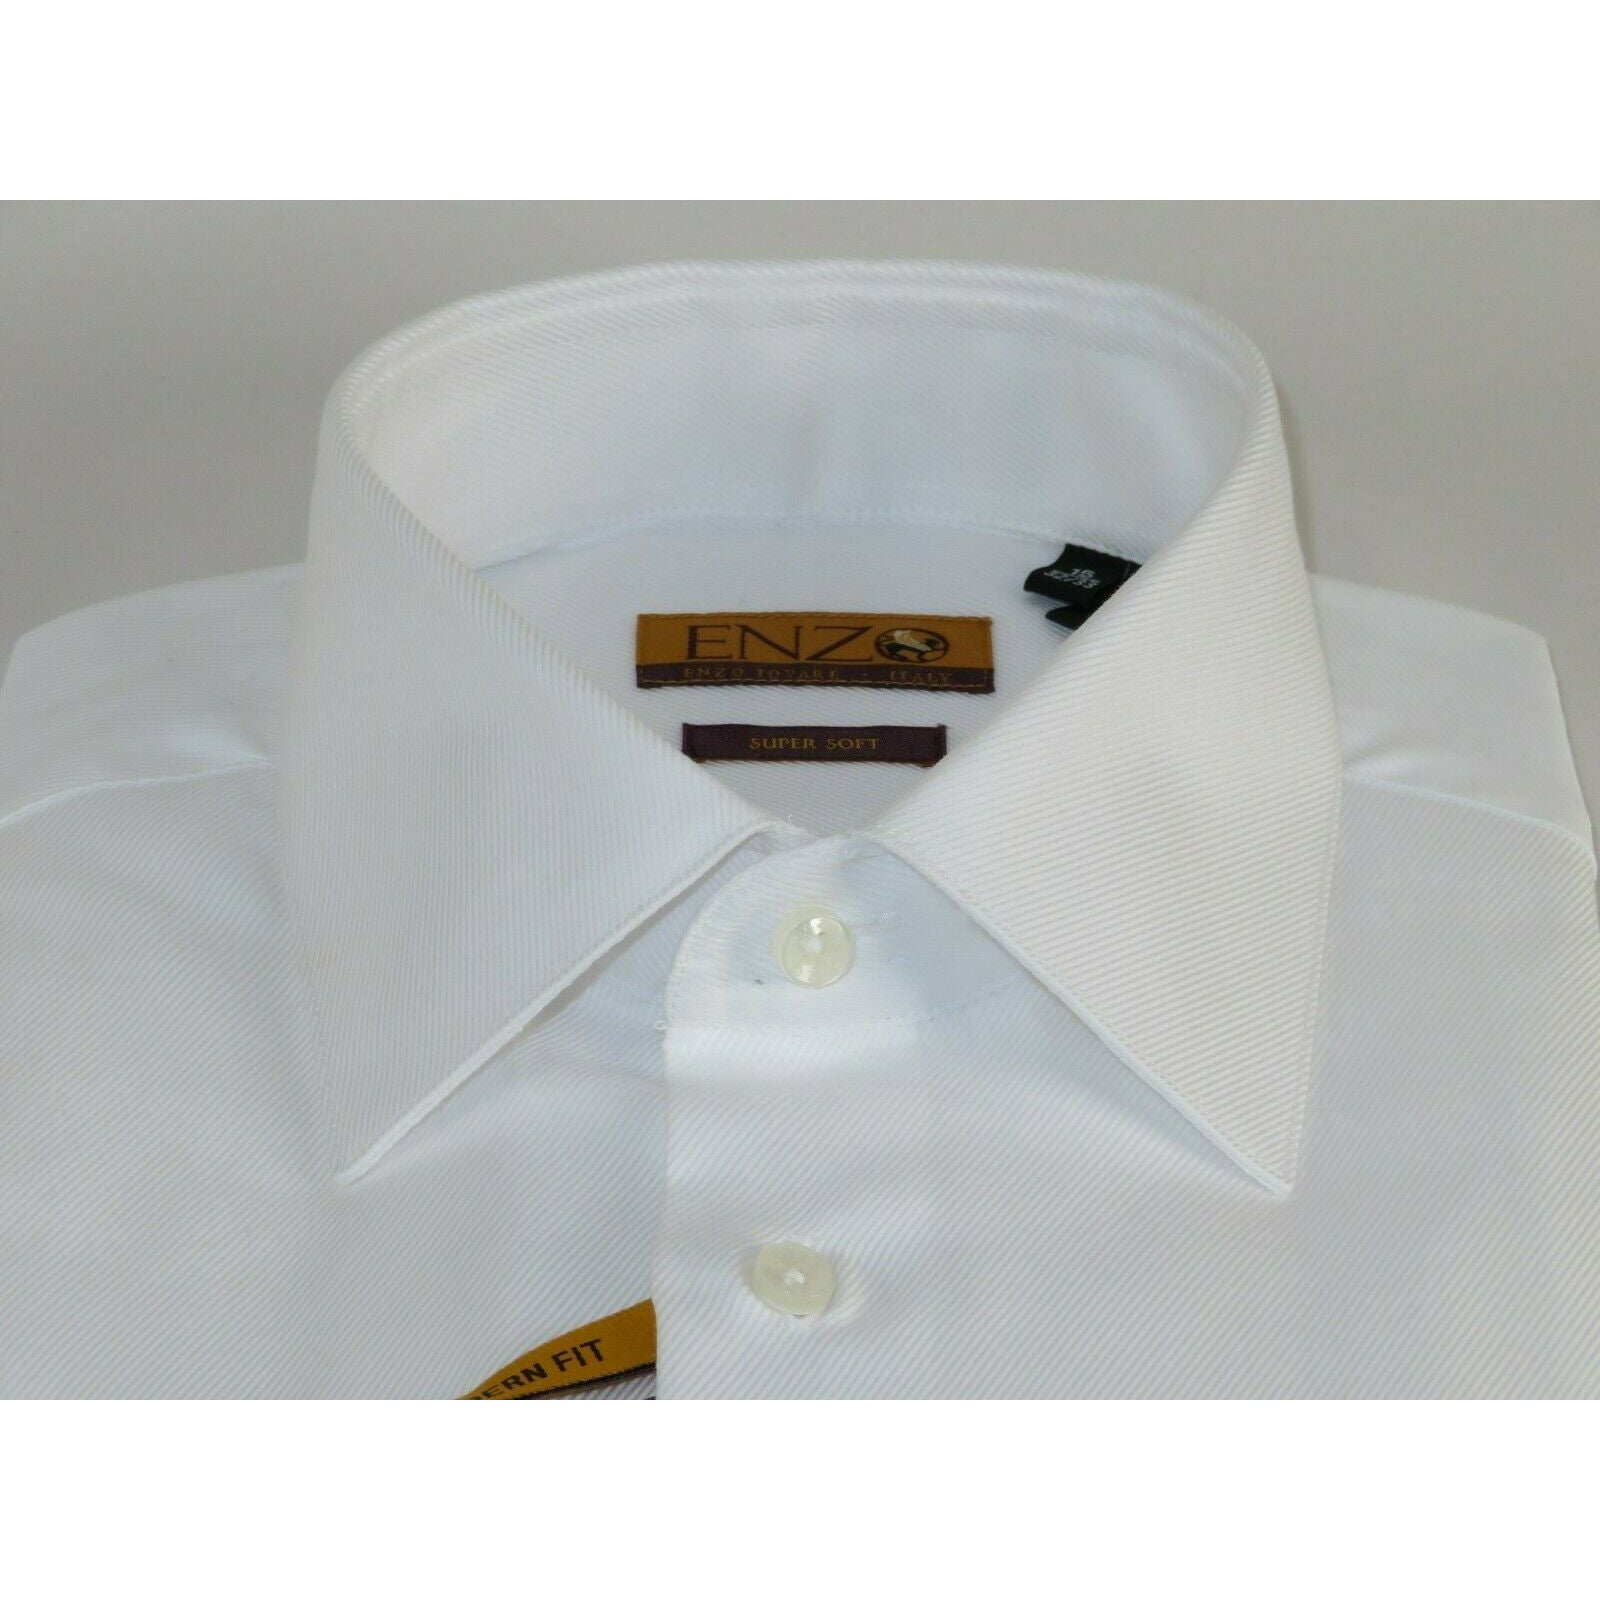 Mens long sleeves Cotton Shirt French Cuffs Wrinkle Resistance ENZO 61102 White 